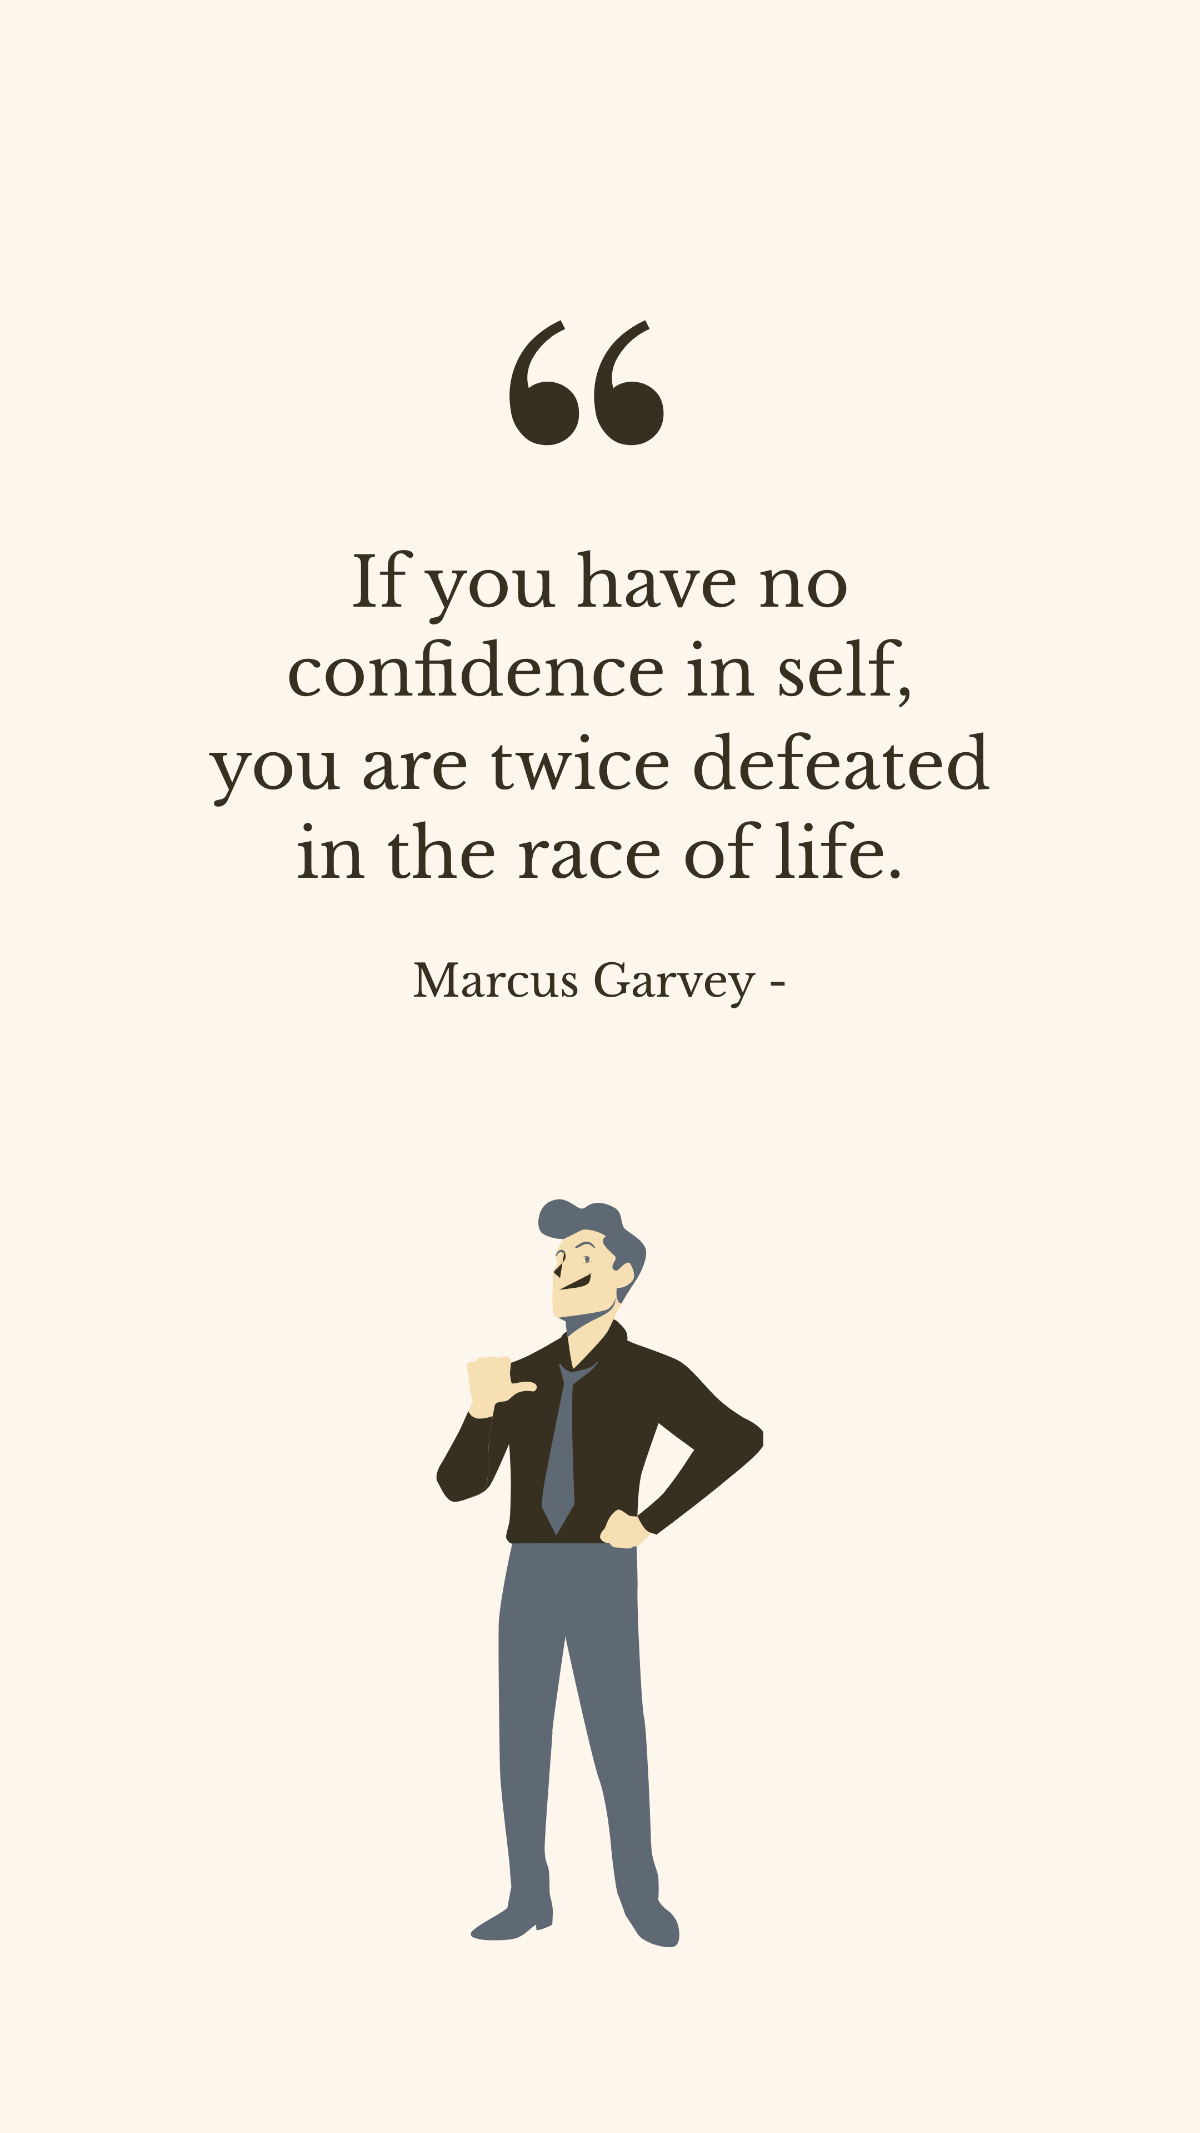 Free Marcus Garvey - If you have no confidence in self, you are twice defeated in the race of life. Template